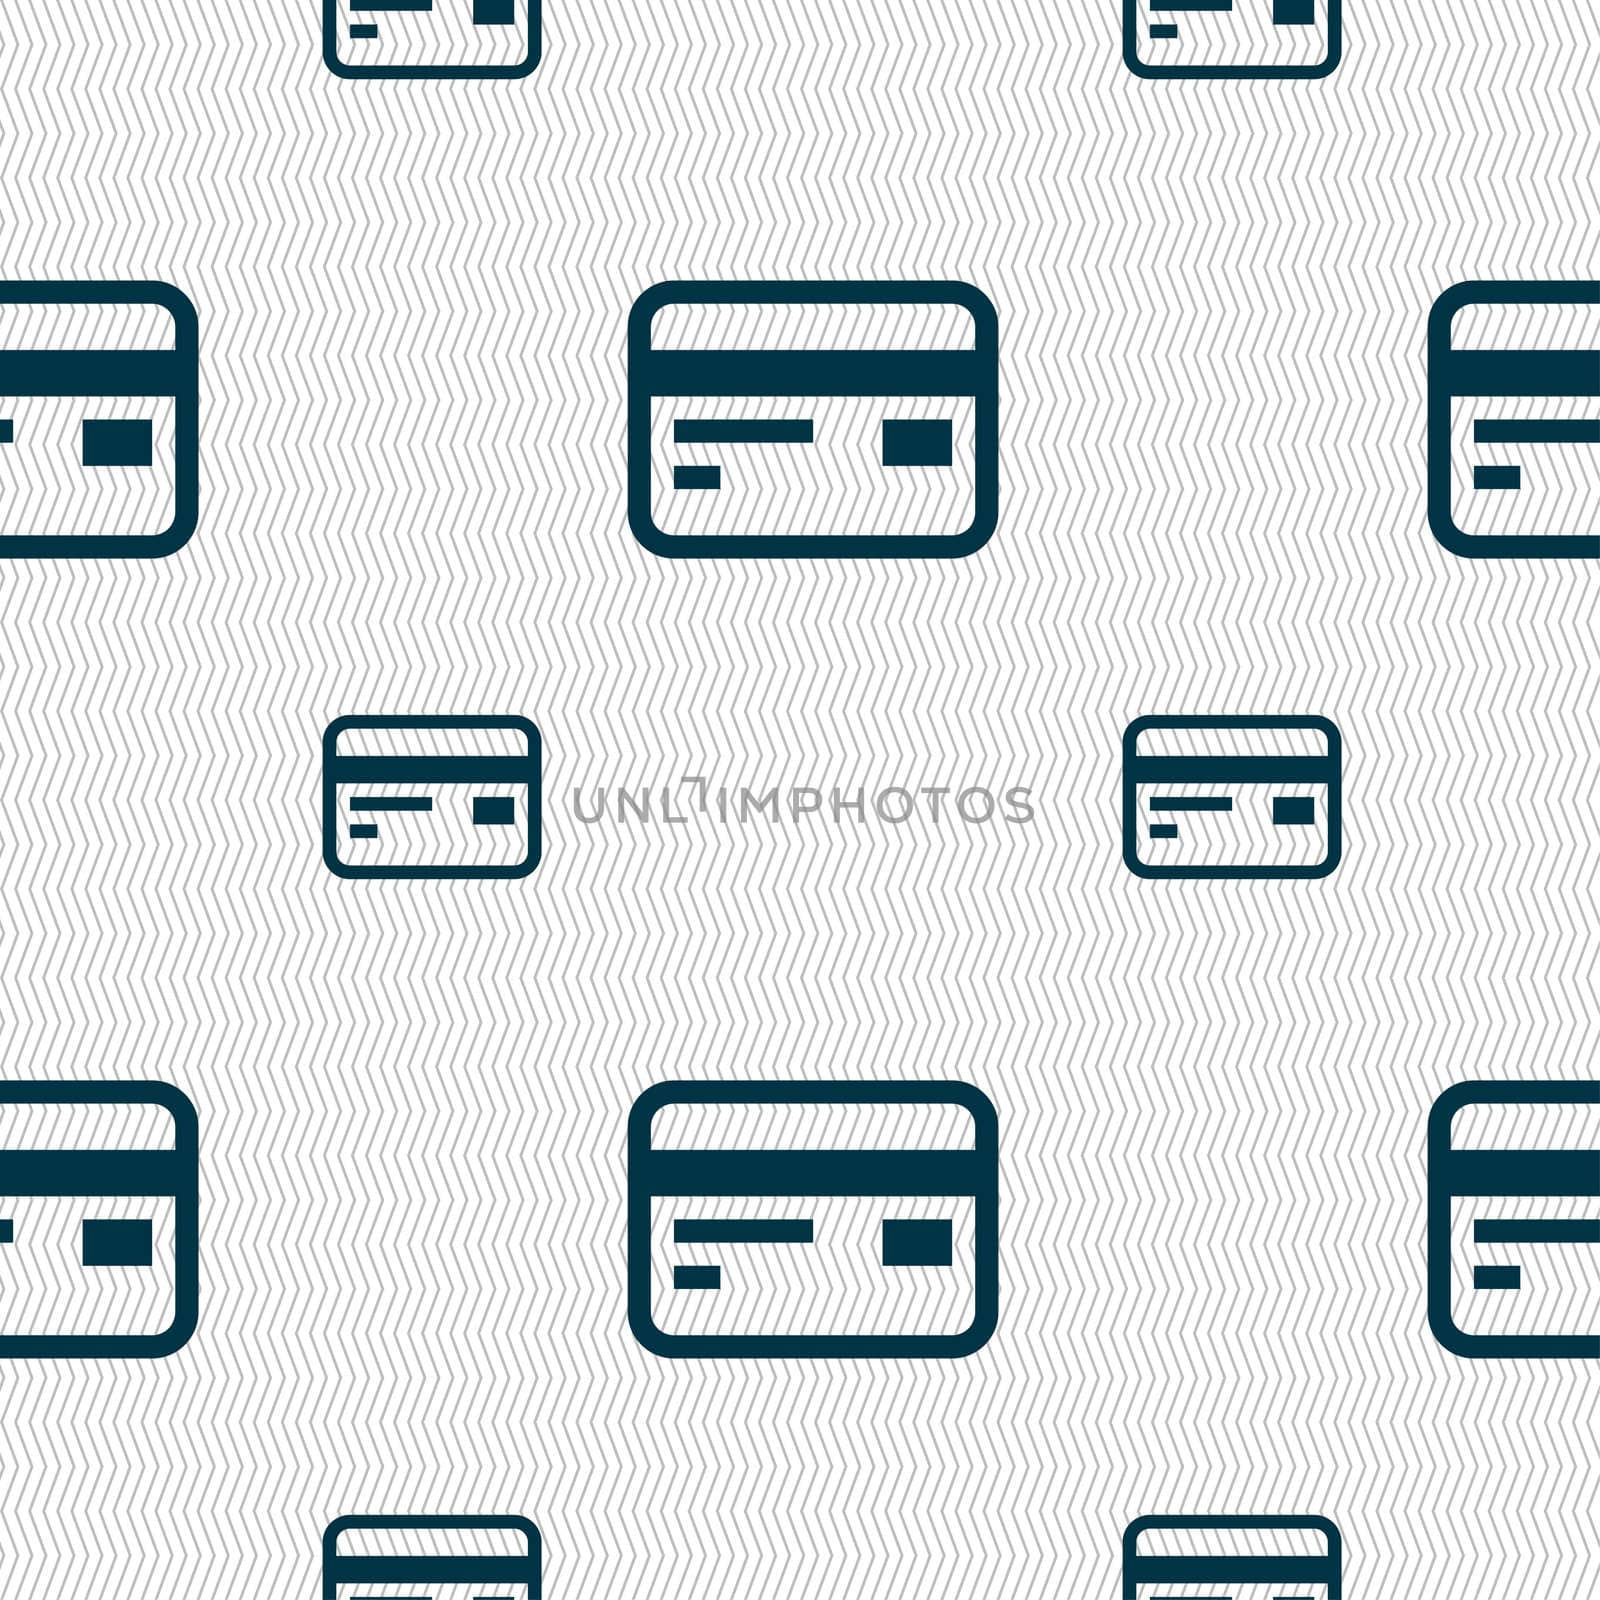 Credit, debit card icon sign. Seamless pattern with geometric texture. illustration